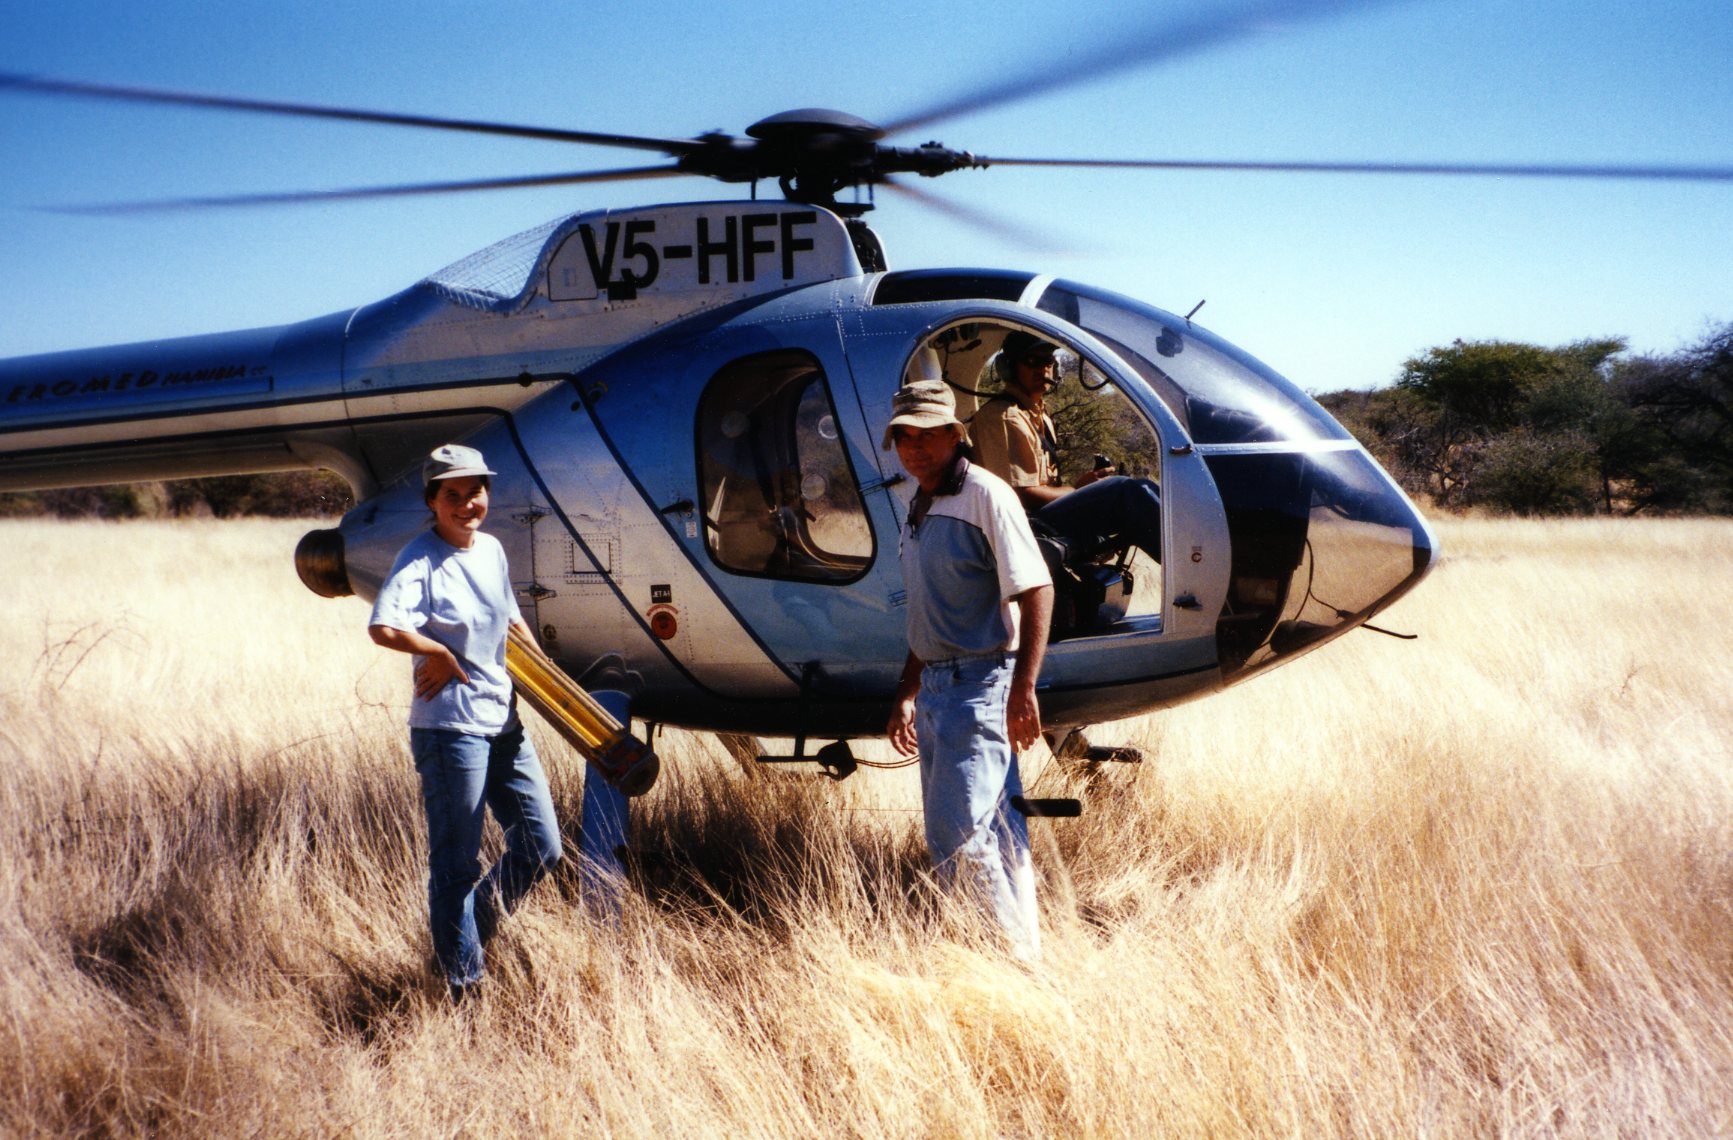 surveying in Namibia with the help of a helicopter